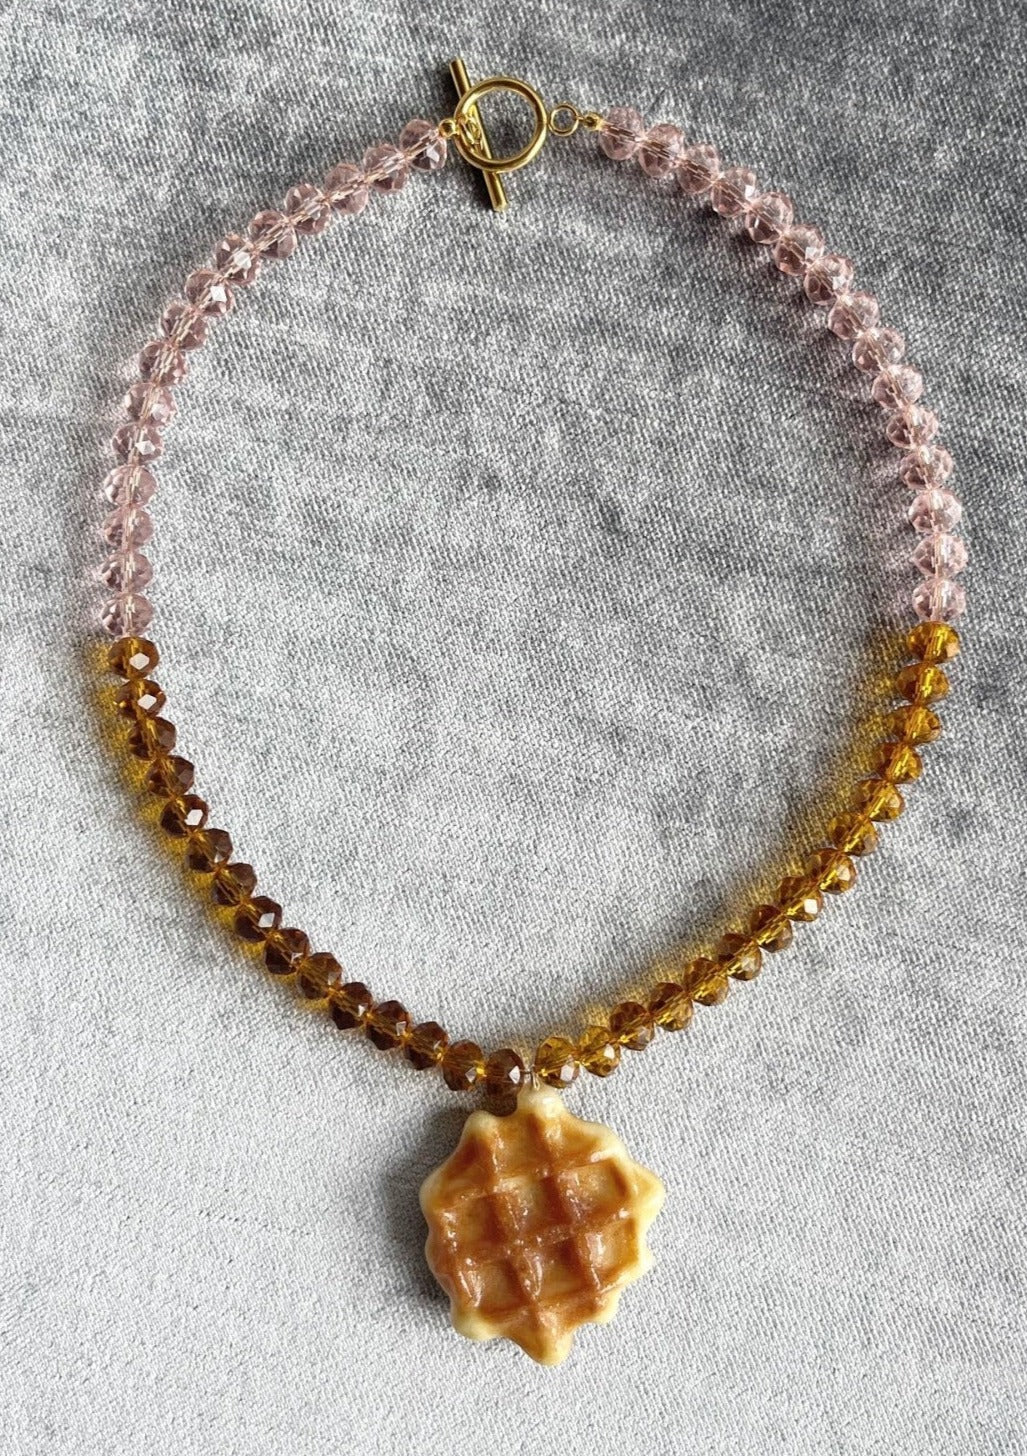 Real miniature waffle biscuit pendant preserved in resin on syrup and rose tone glass beaded chain with gold clasp.